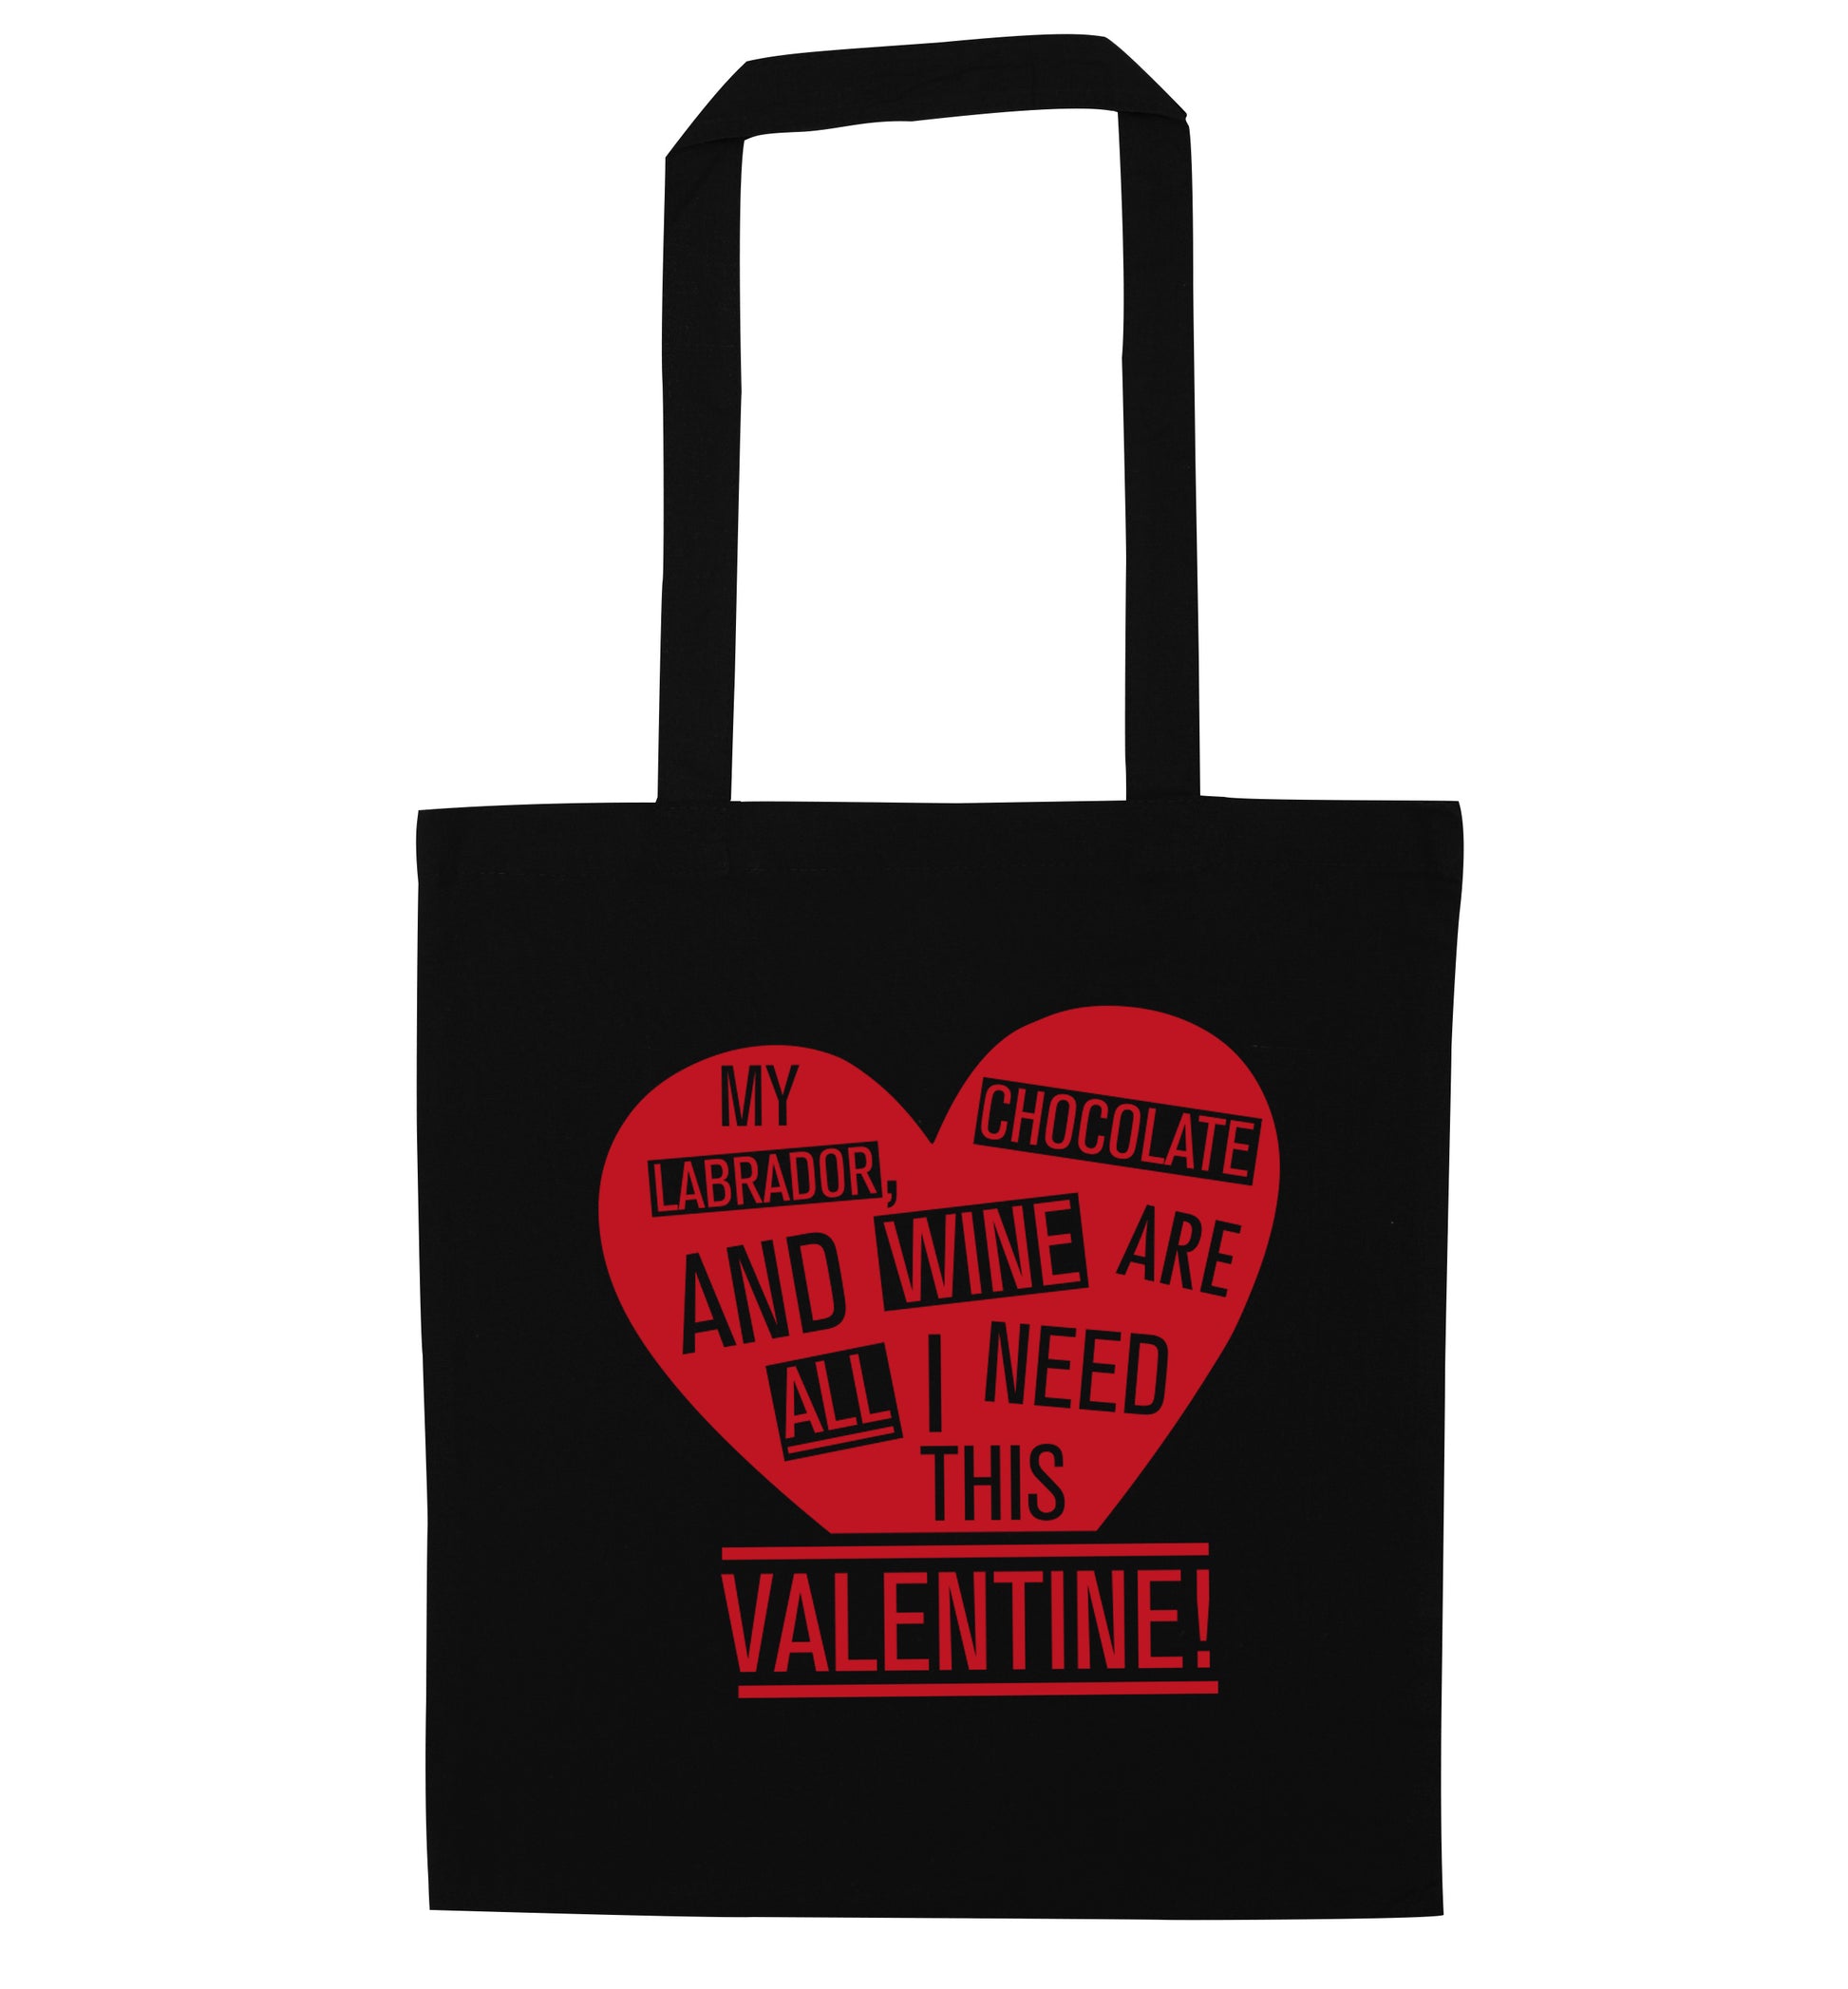 My labrador, chocolate and wine are all I need this valentine! black tote bag